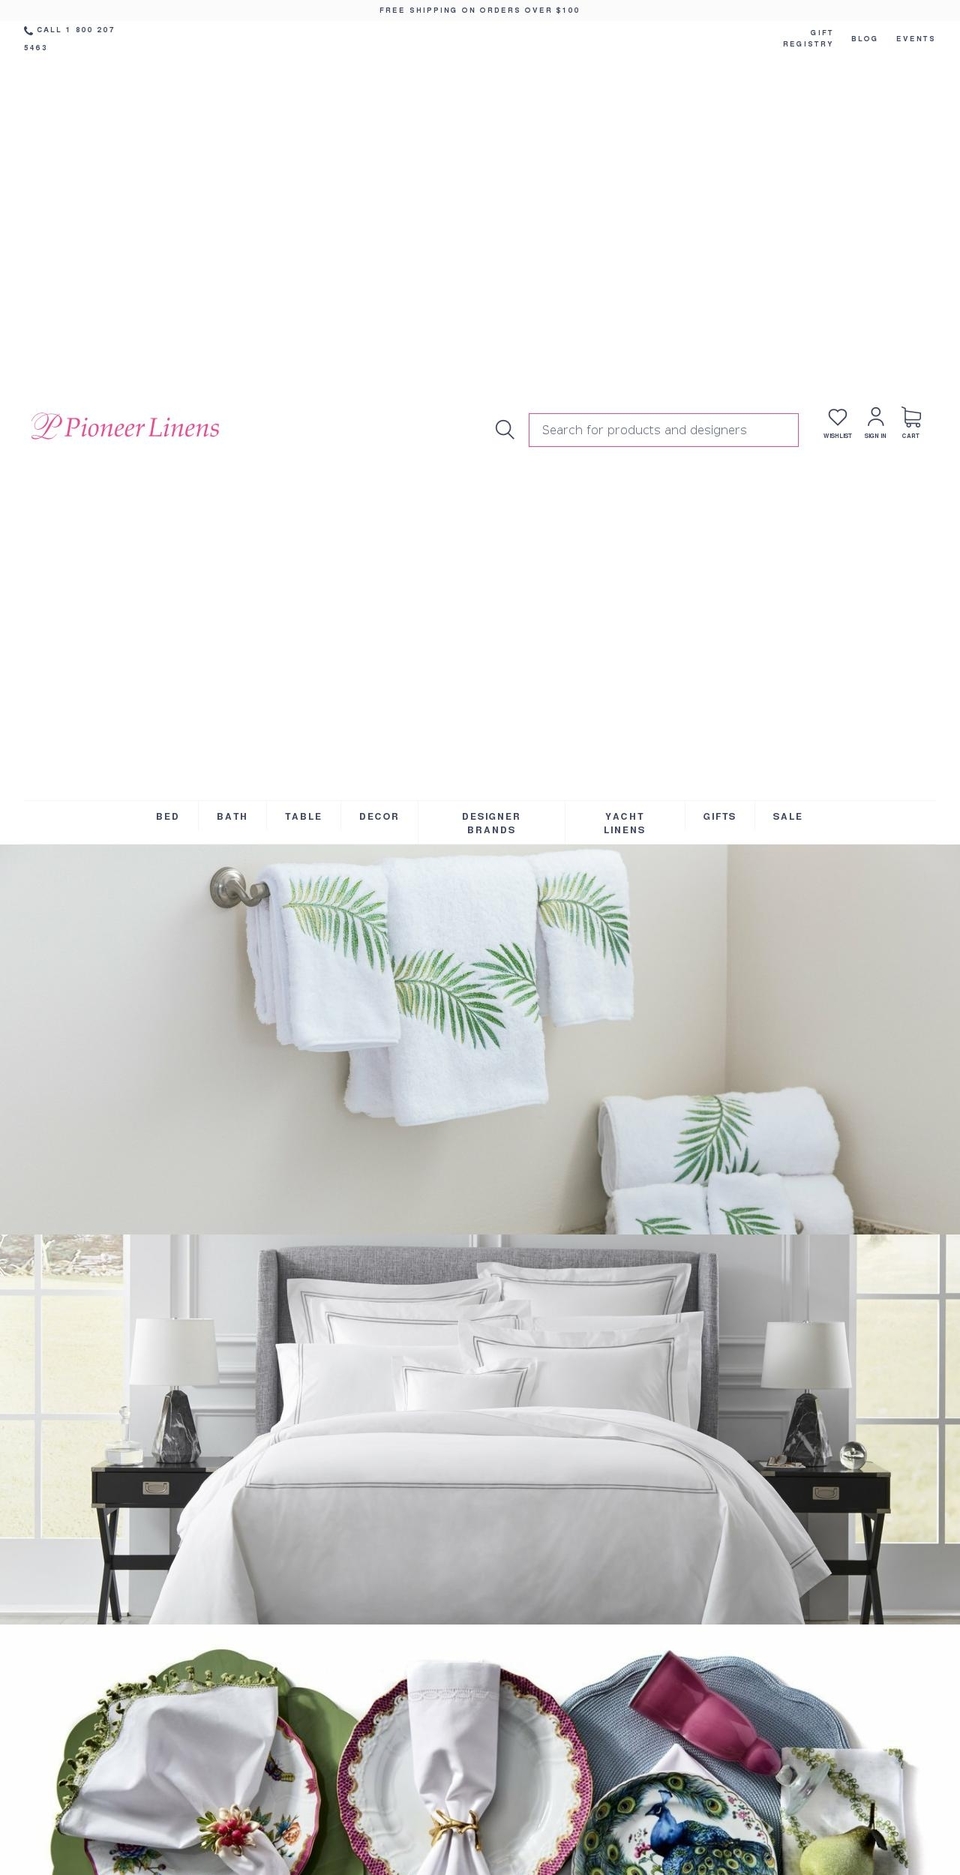 Buko Shopify Theme - Products Consolidation Shopify theme site example pioneeronlinelinens.com